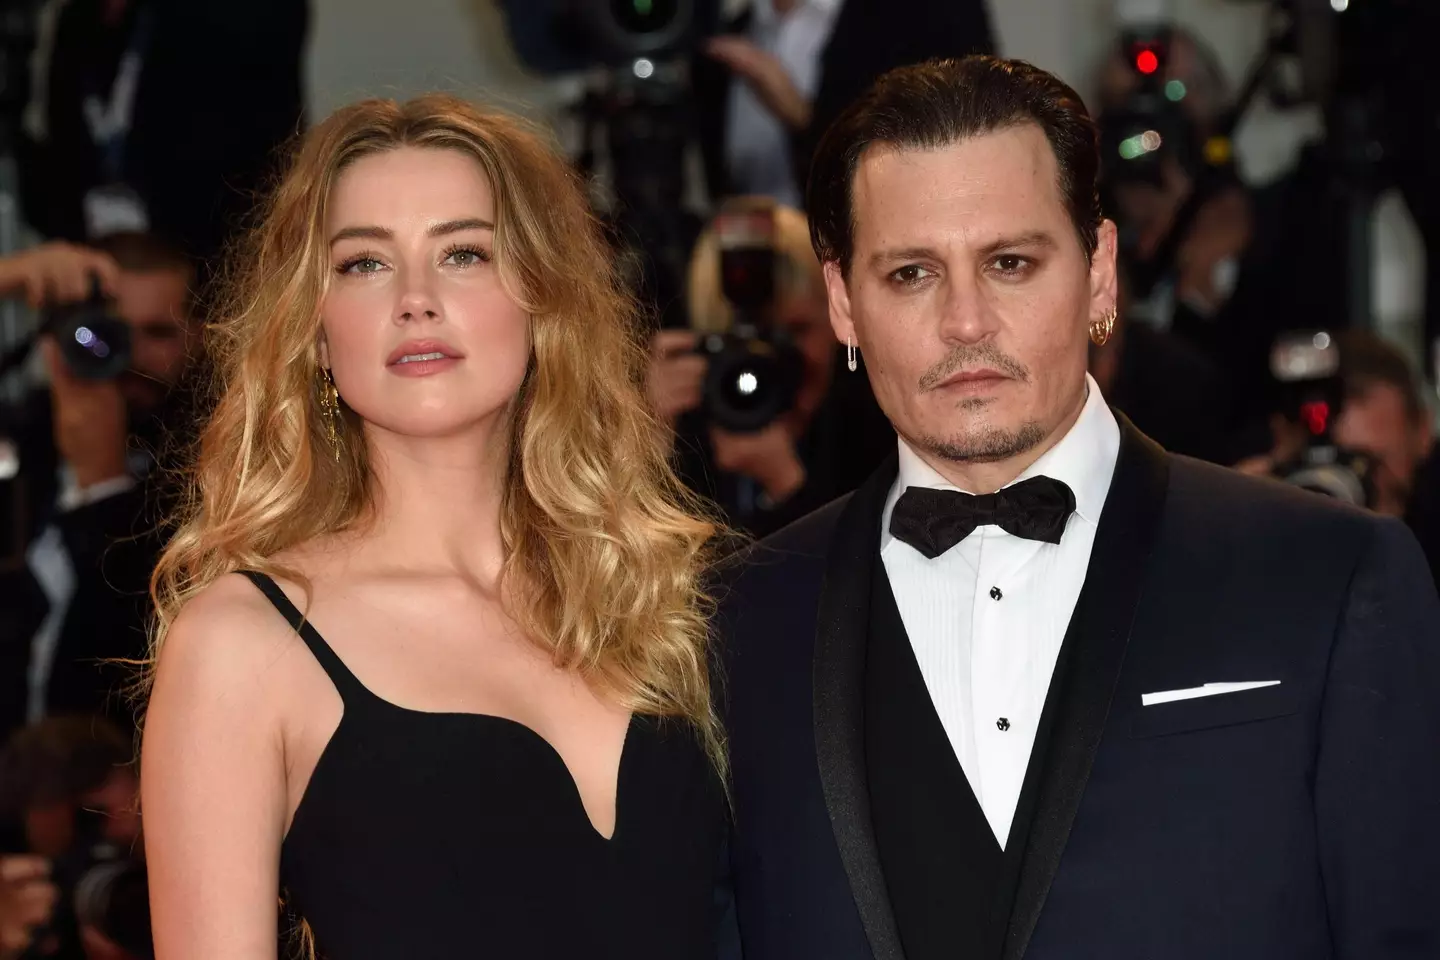 Johnny Depp and Amber Heard married in 2015 before the actress filed for divorce a year later (